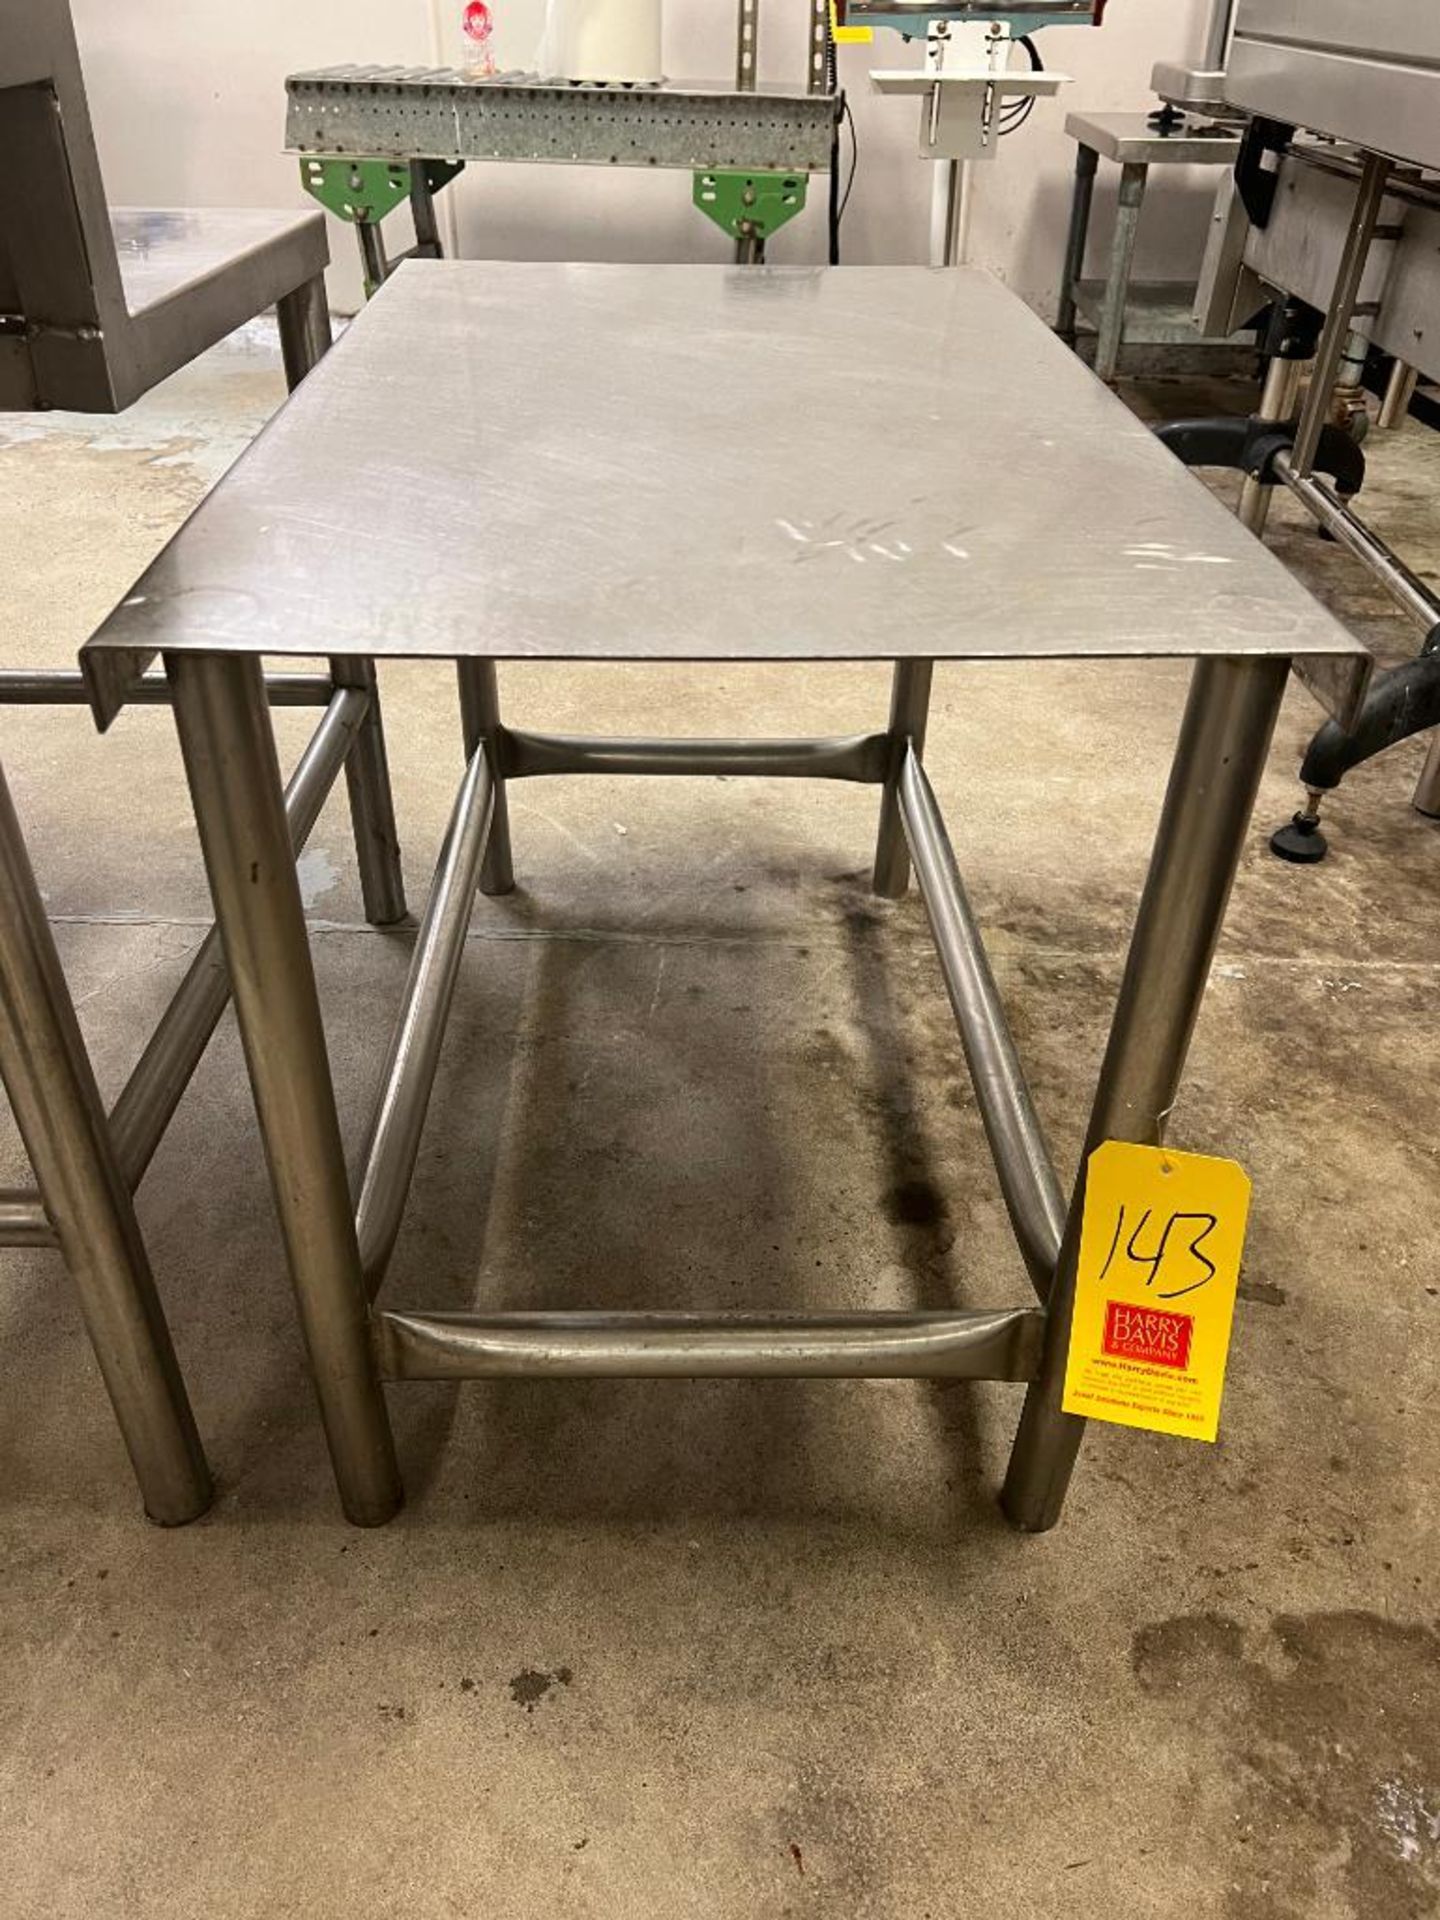 S/S Table, Dimensions = 33" Length x 20" Width - Rigging Fee: $50